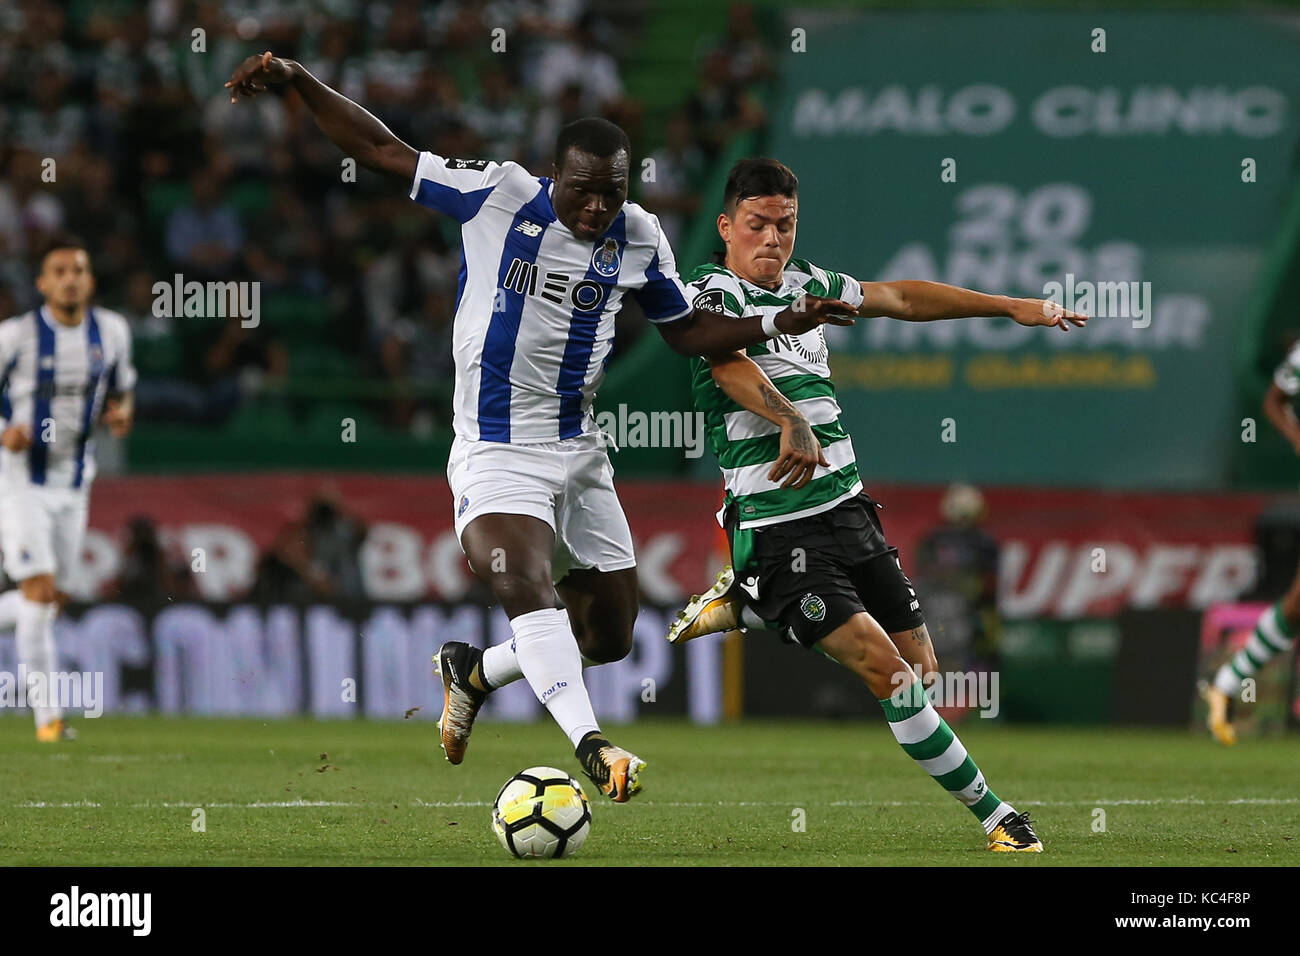 Lisbon, Portugal. 01st Oct, 2017. FC PortoÕs forward Vincent Aboubakar from Cameroon (L) and Sporting«s defender Jonathan Silva from Argentina (R) during Premier League 2017/18 match between Sporting CP and FC Porto, at Alvalade Stadium in Lisbon on October 1, 2017. (Photo by Bruno Barros / DPI) Credit: Bruno Barros/Alamy Live News Stock Photo